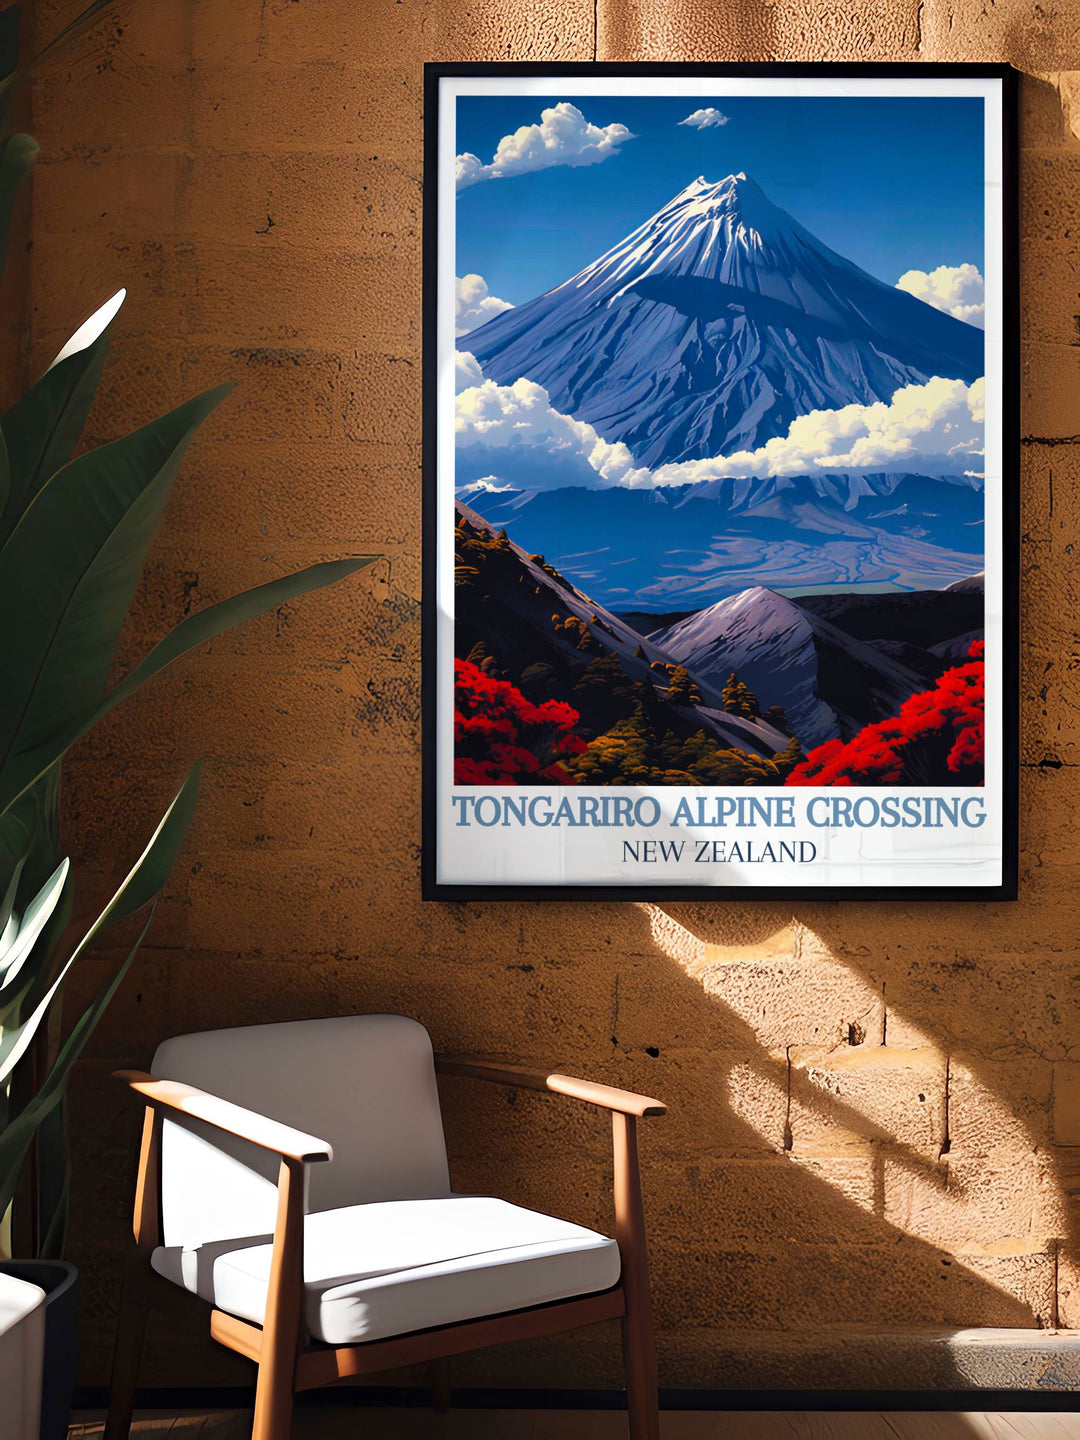 New Zealand framed art pieces that highlight the iconic Mount Ngauruhoe, offering a celebration of the countrys diverse and stunning landscapes for your home decor.